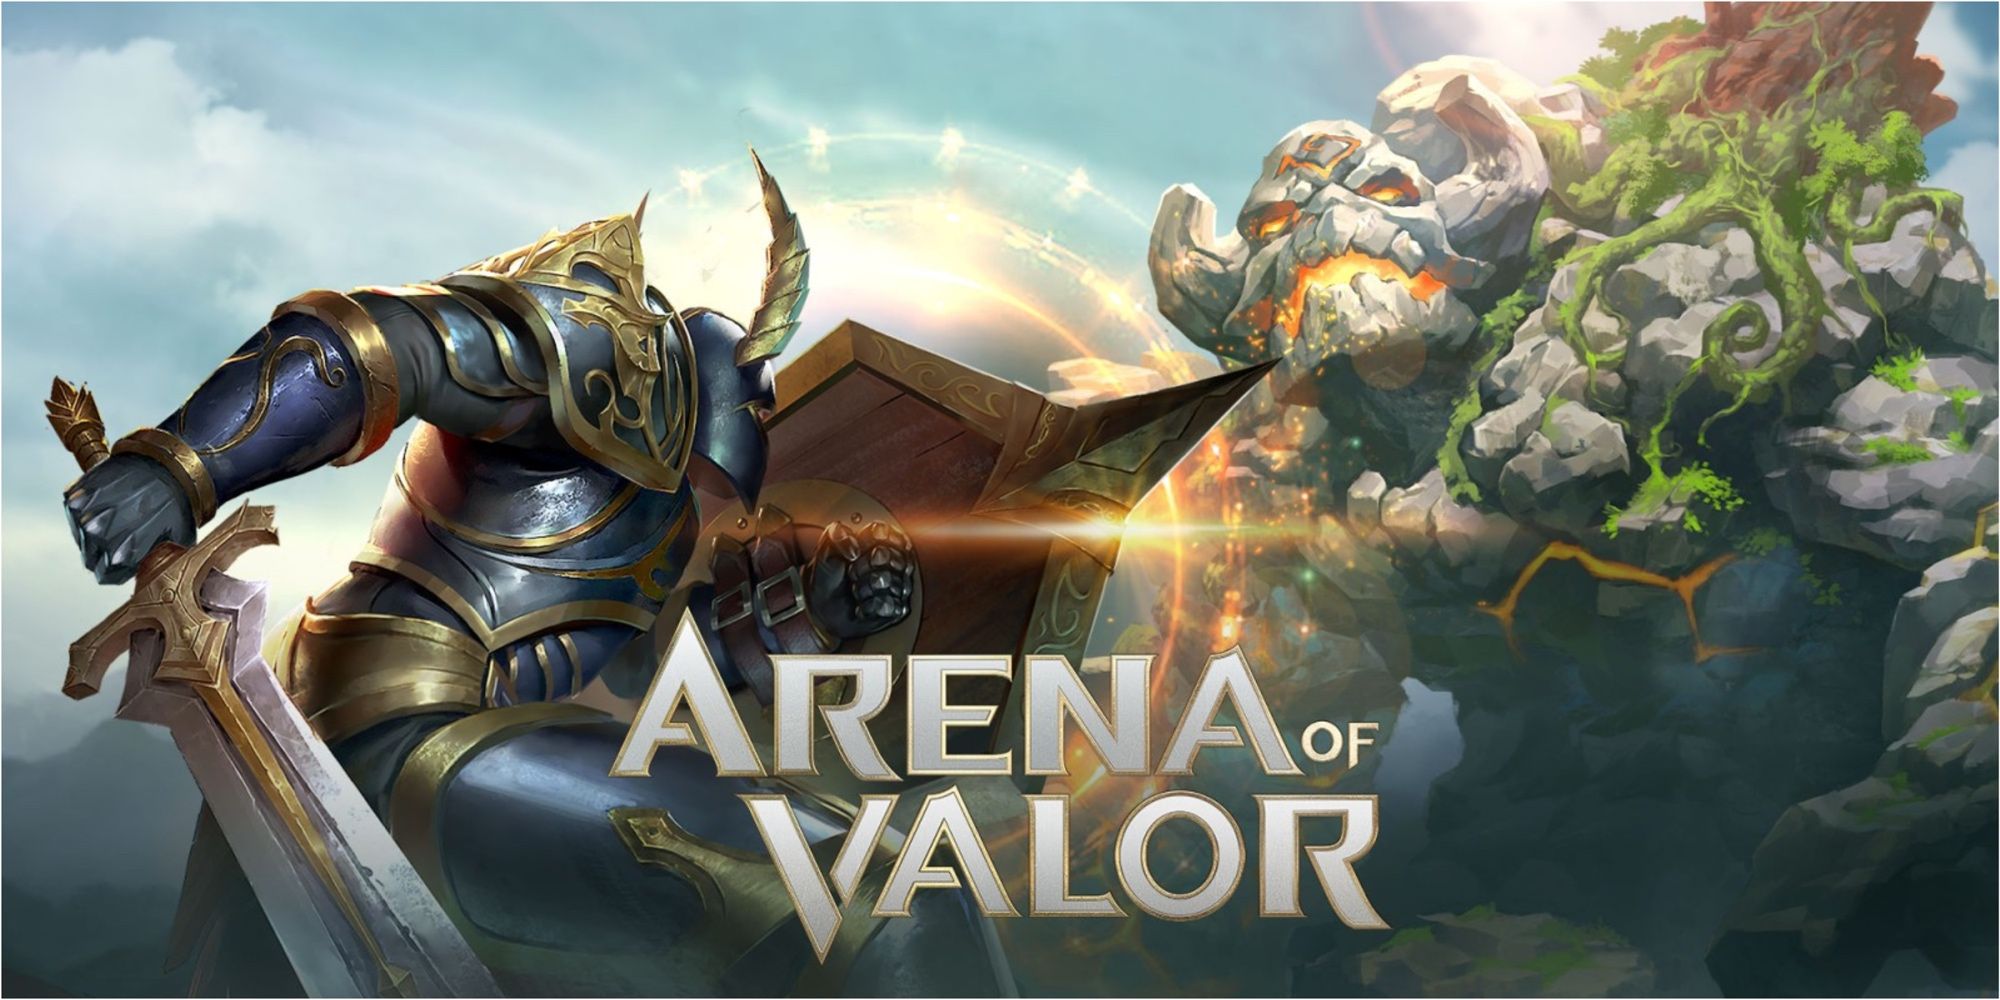 Official poster image of Arena of Valor showing a knight in front of a rock giant